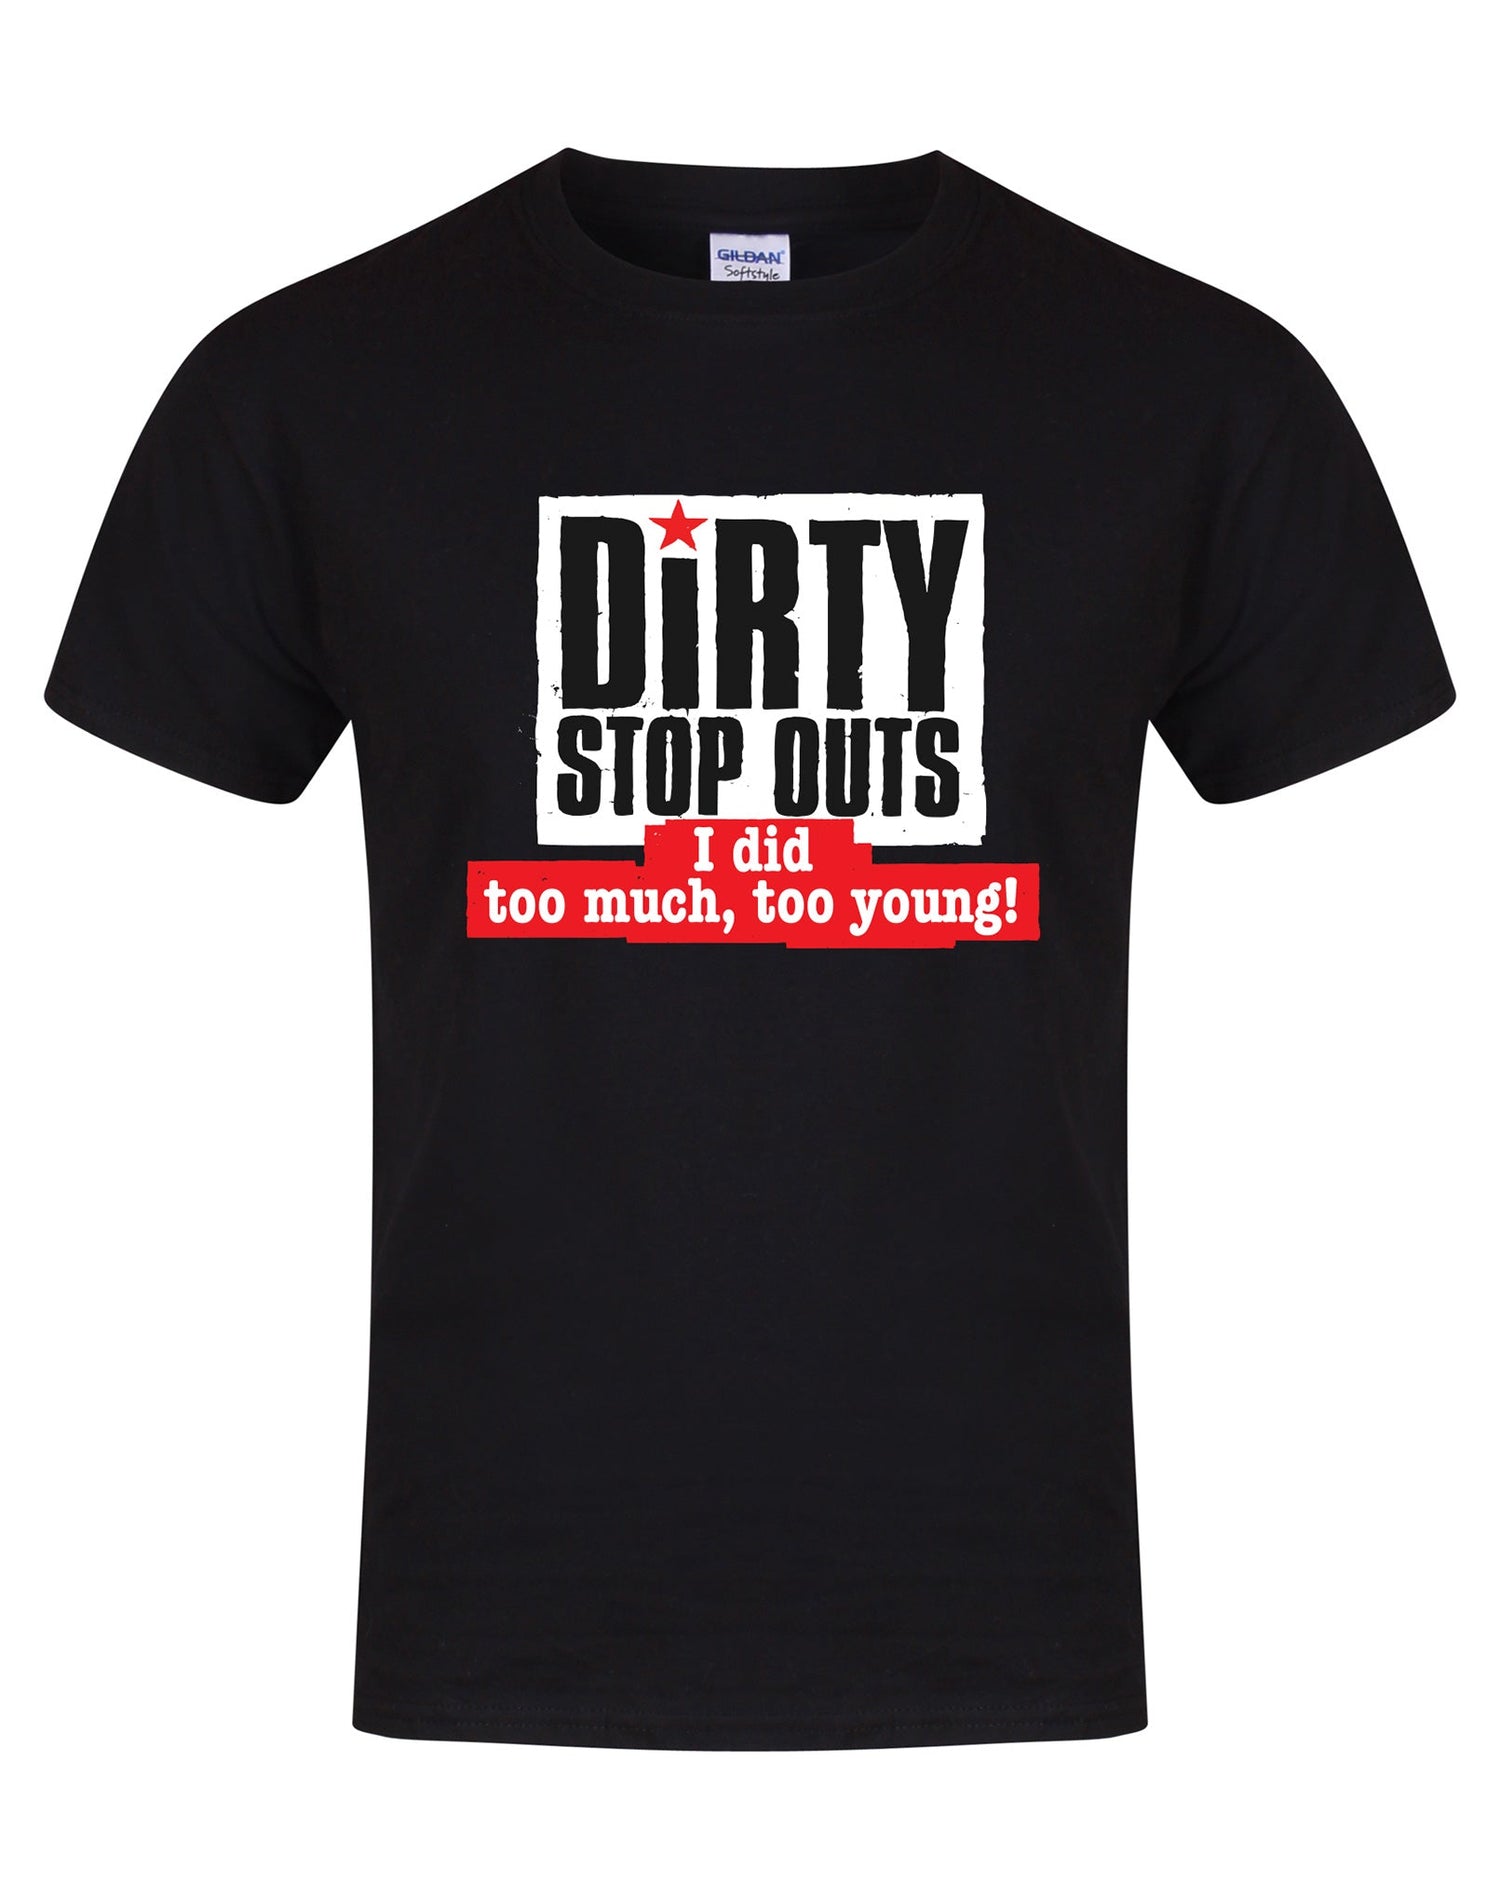 Dirty Stop Outs branded